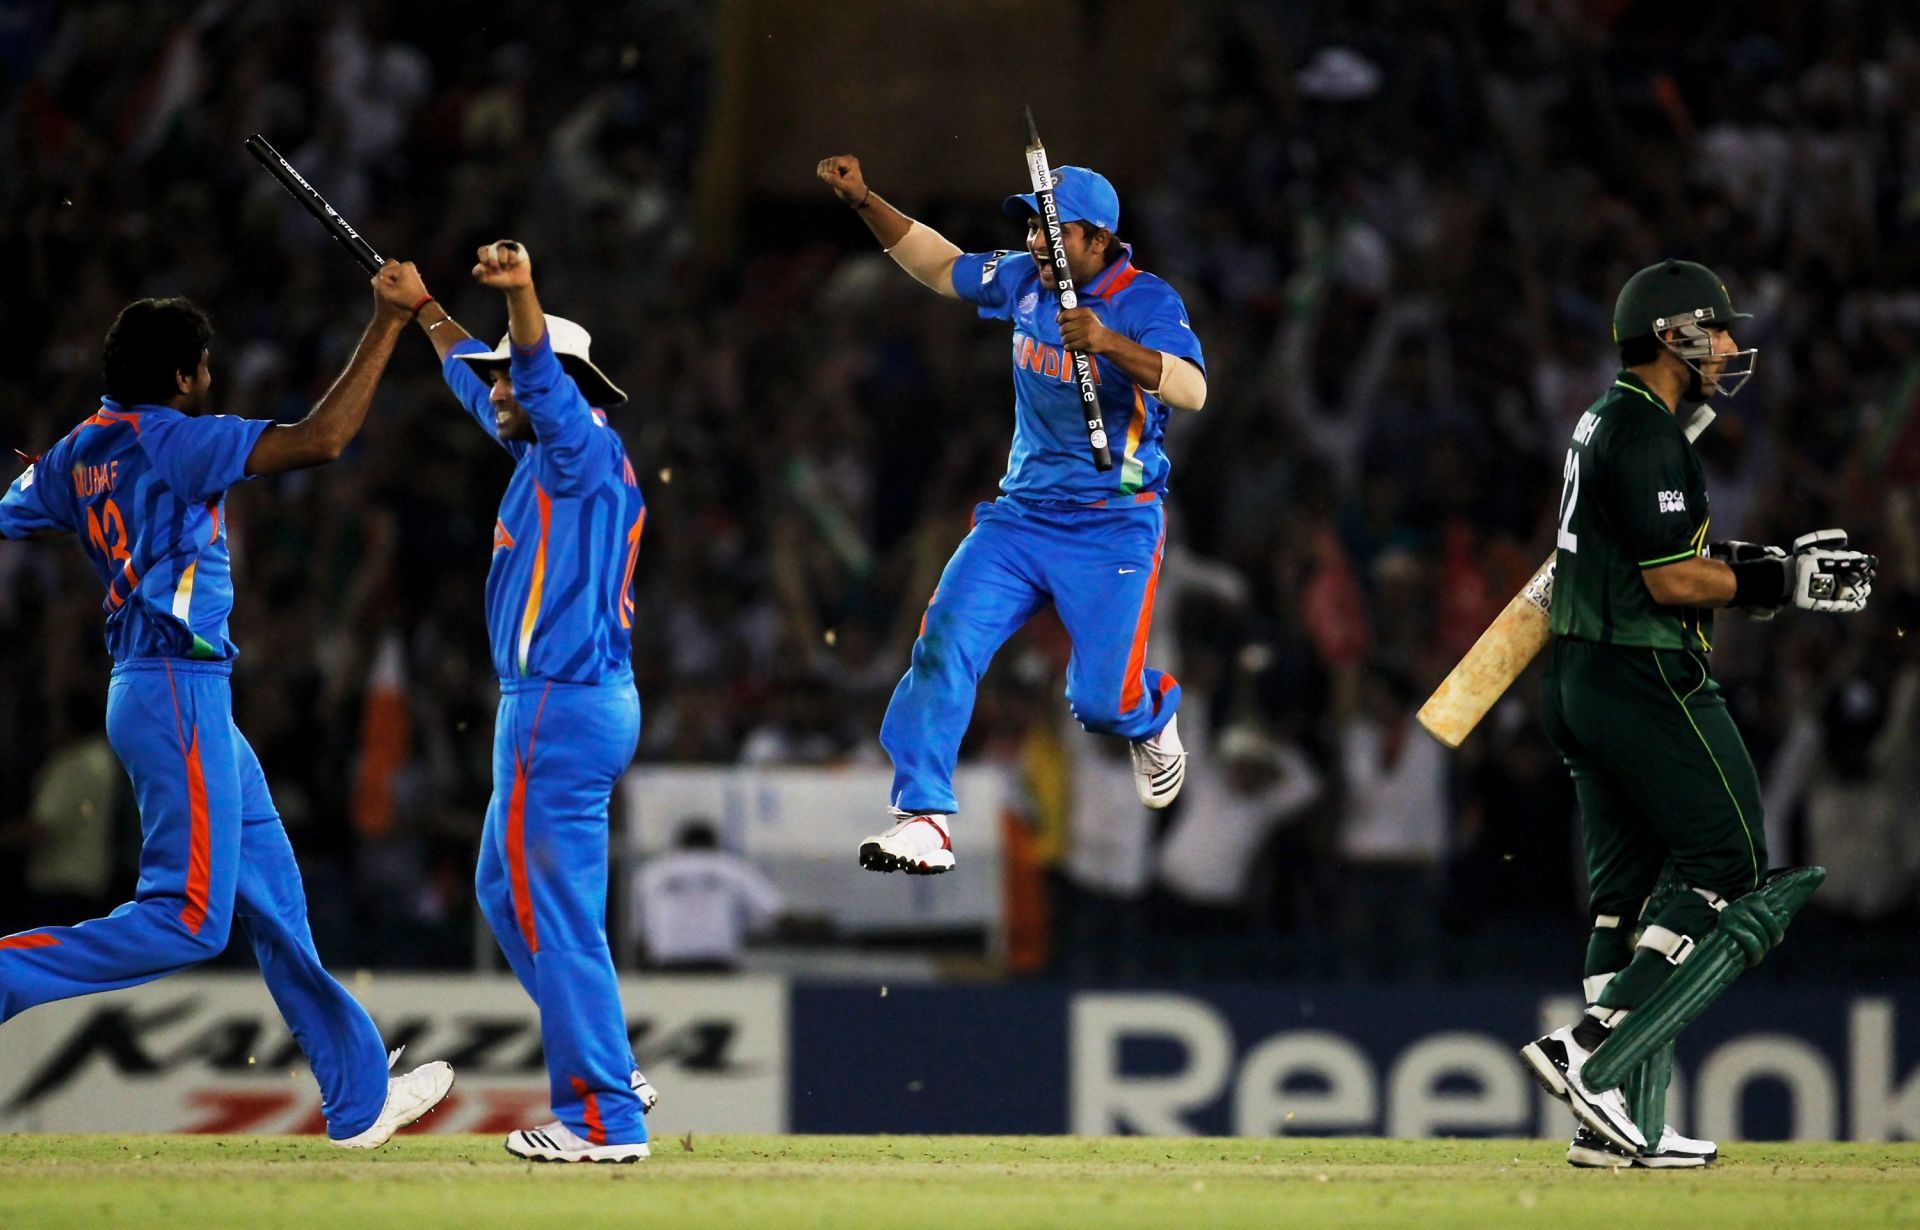 India defeated Pakistan in the semi-final of the 2011 World Cup.